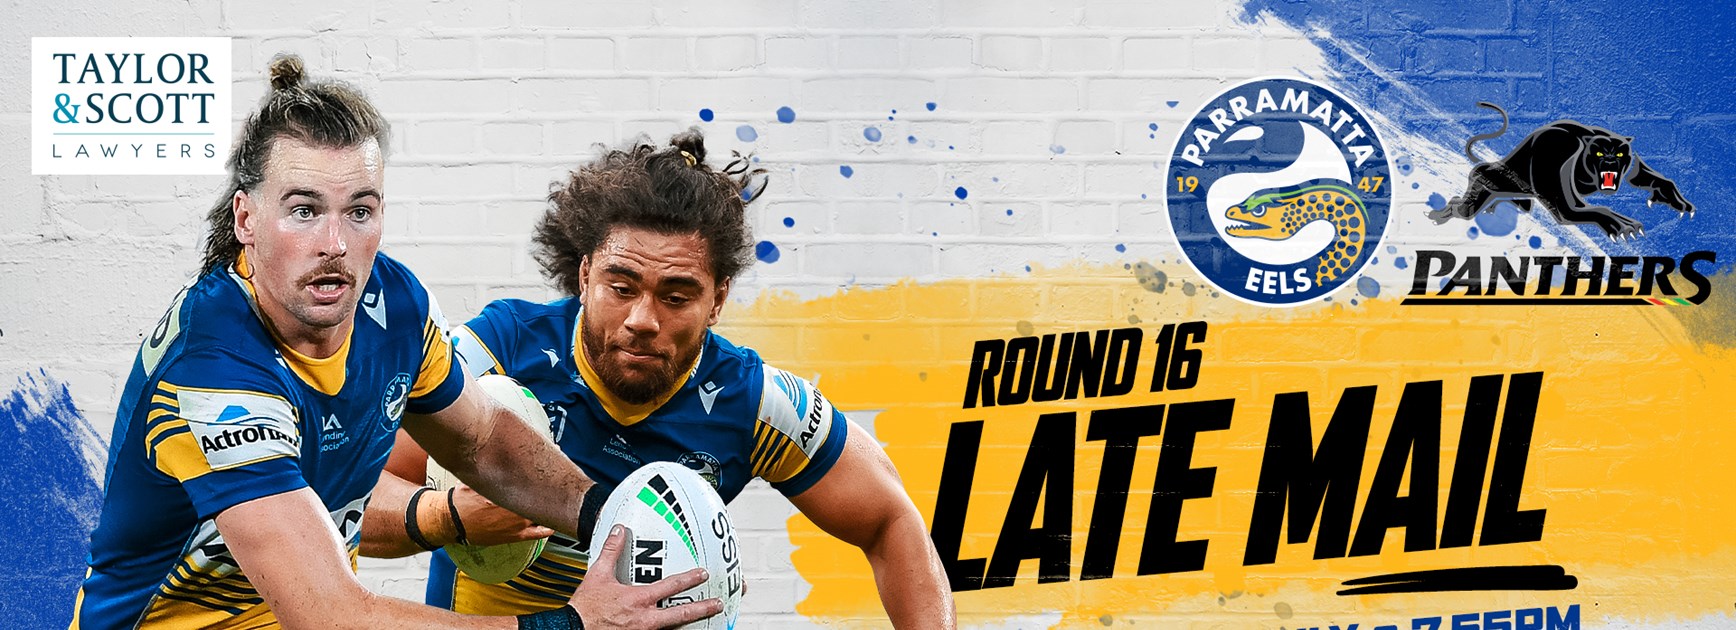 Late Mail - Panthers v Eels, Round 16